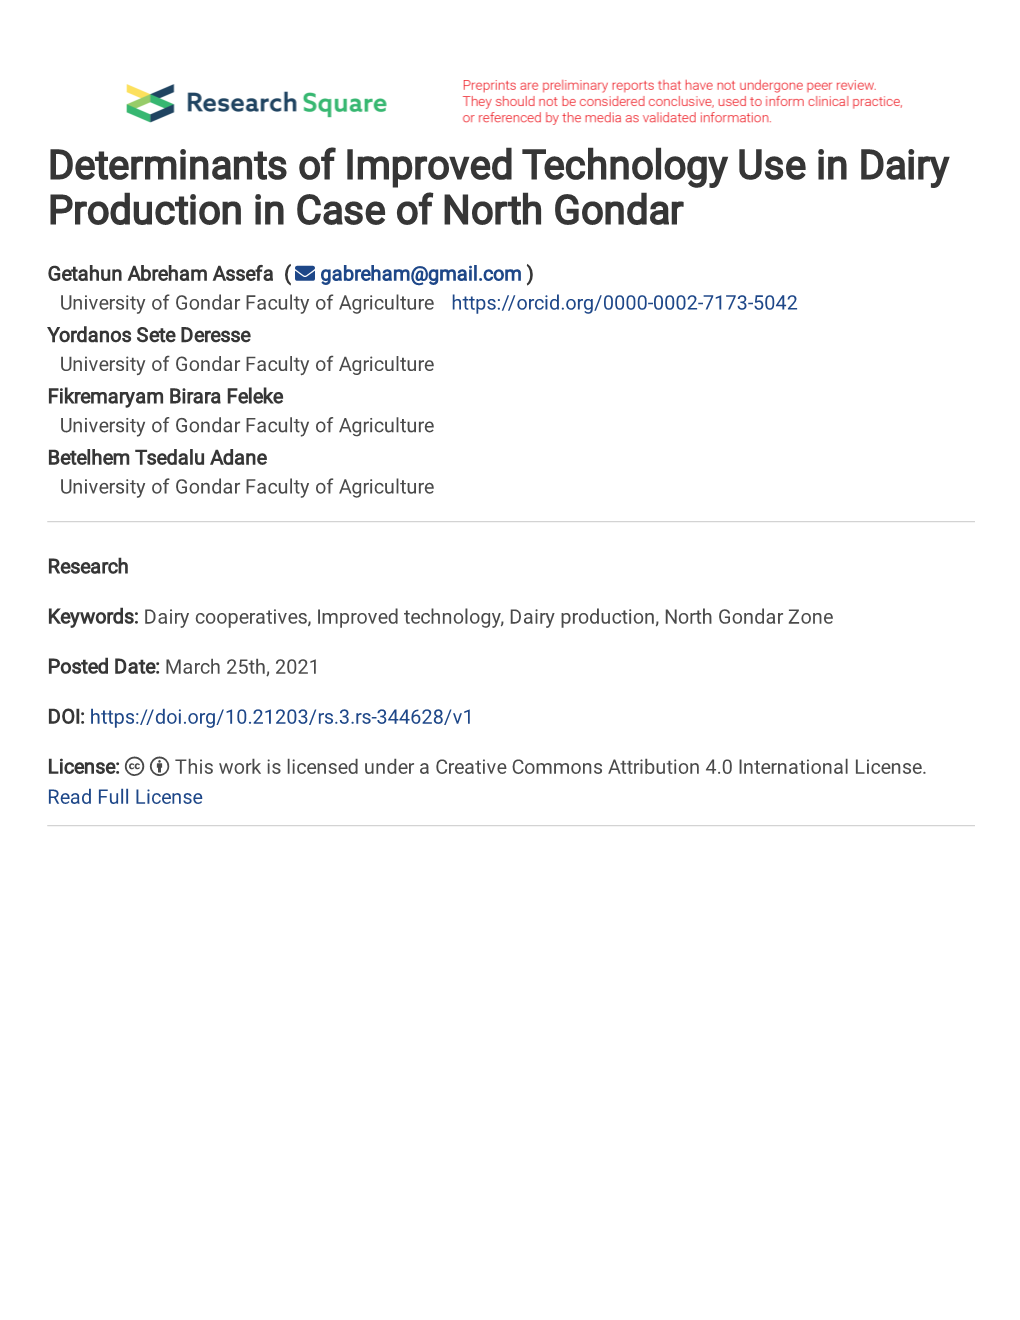 1 Determinants of Improved Technology Use in Dairy